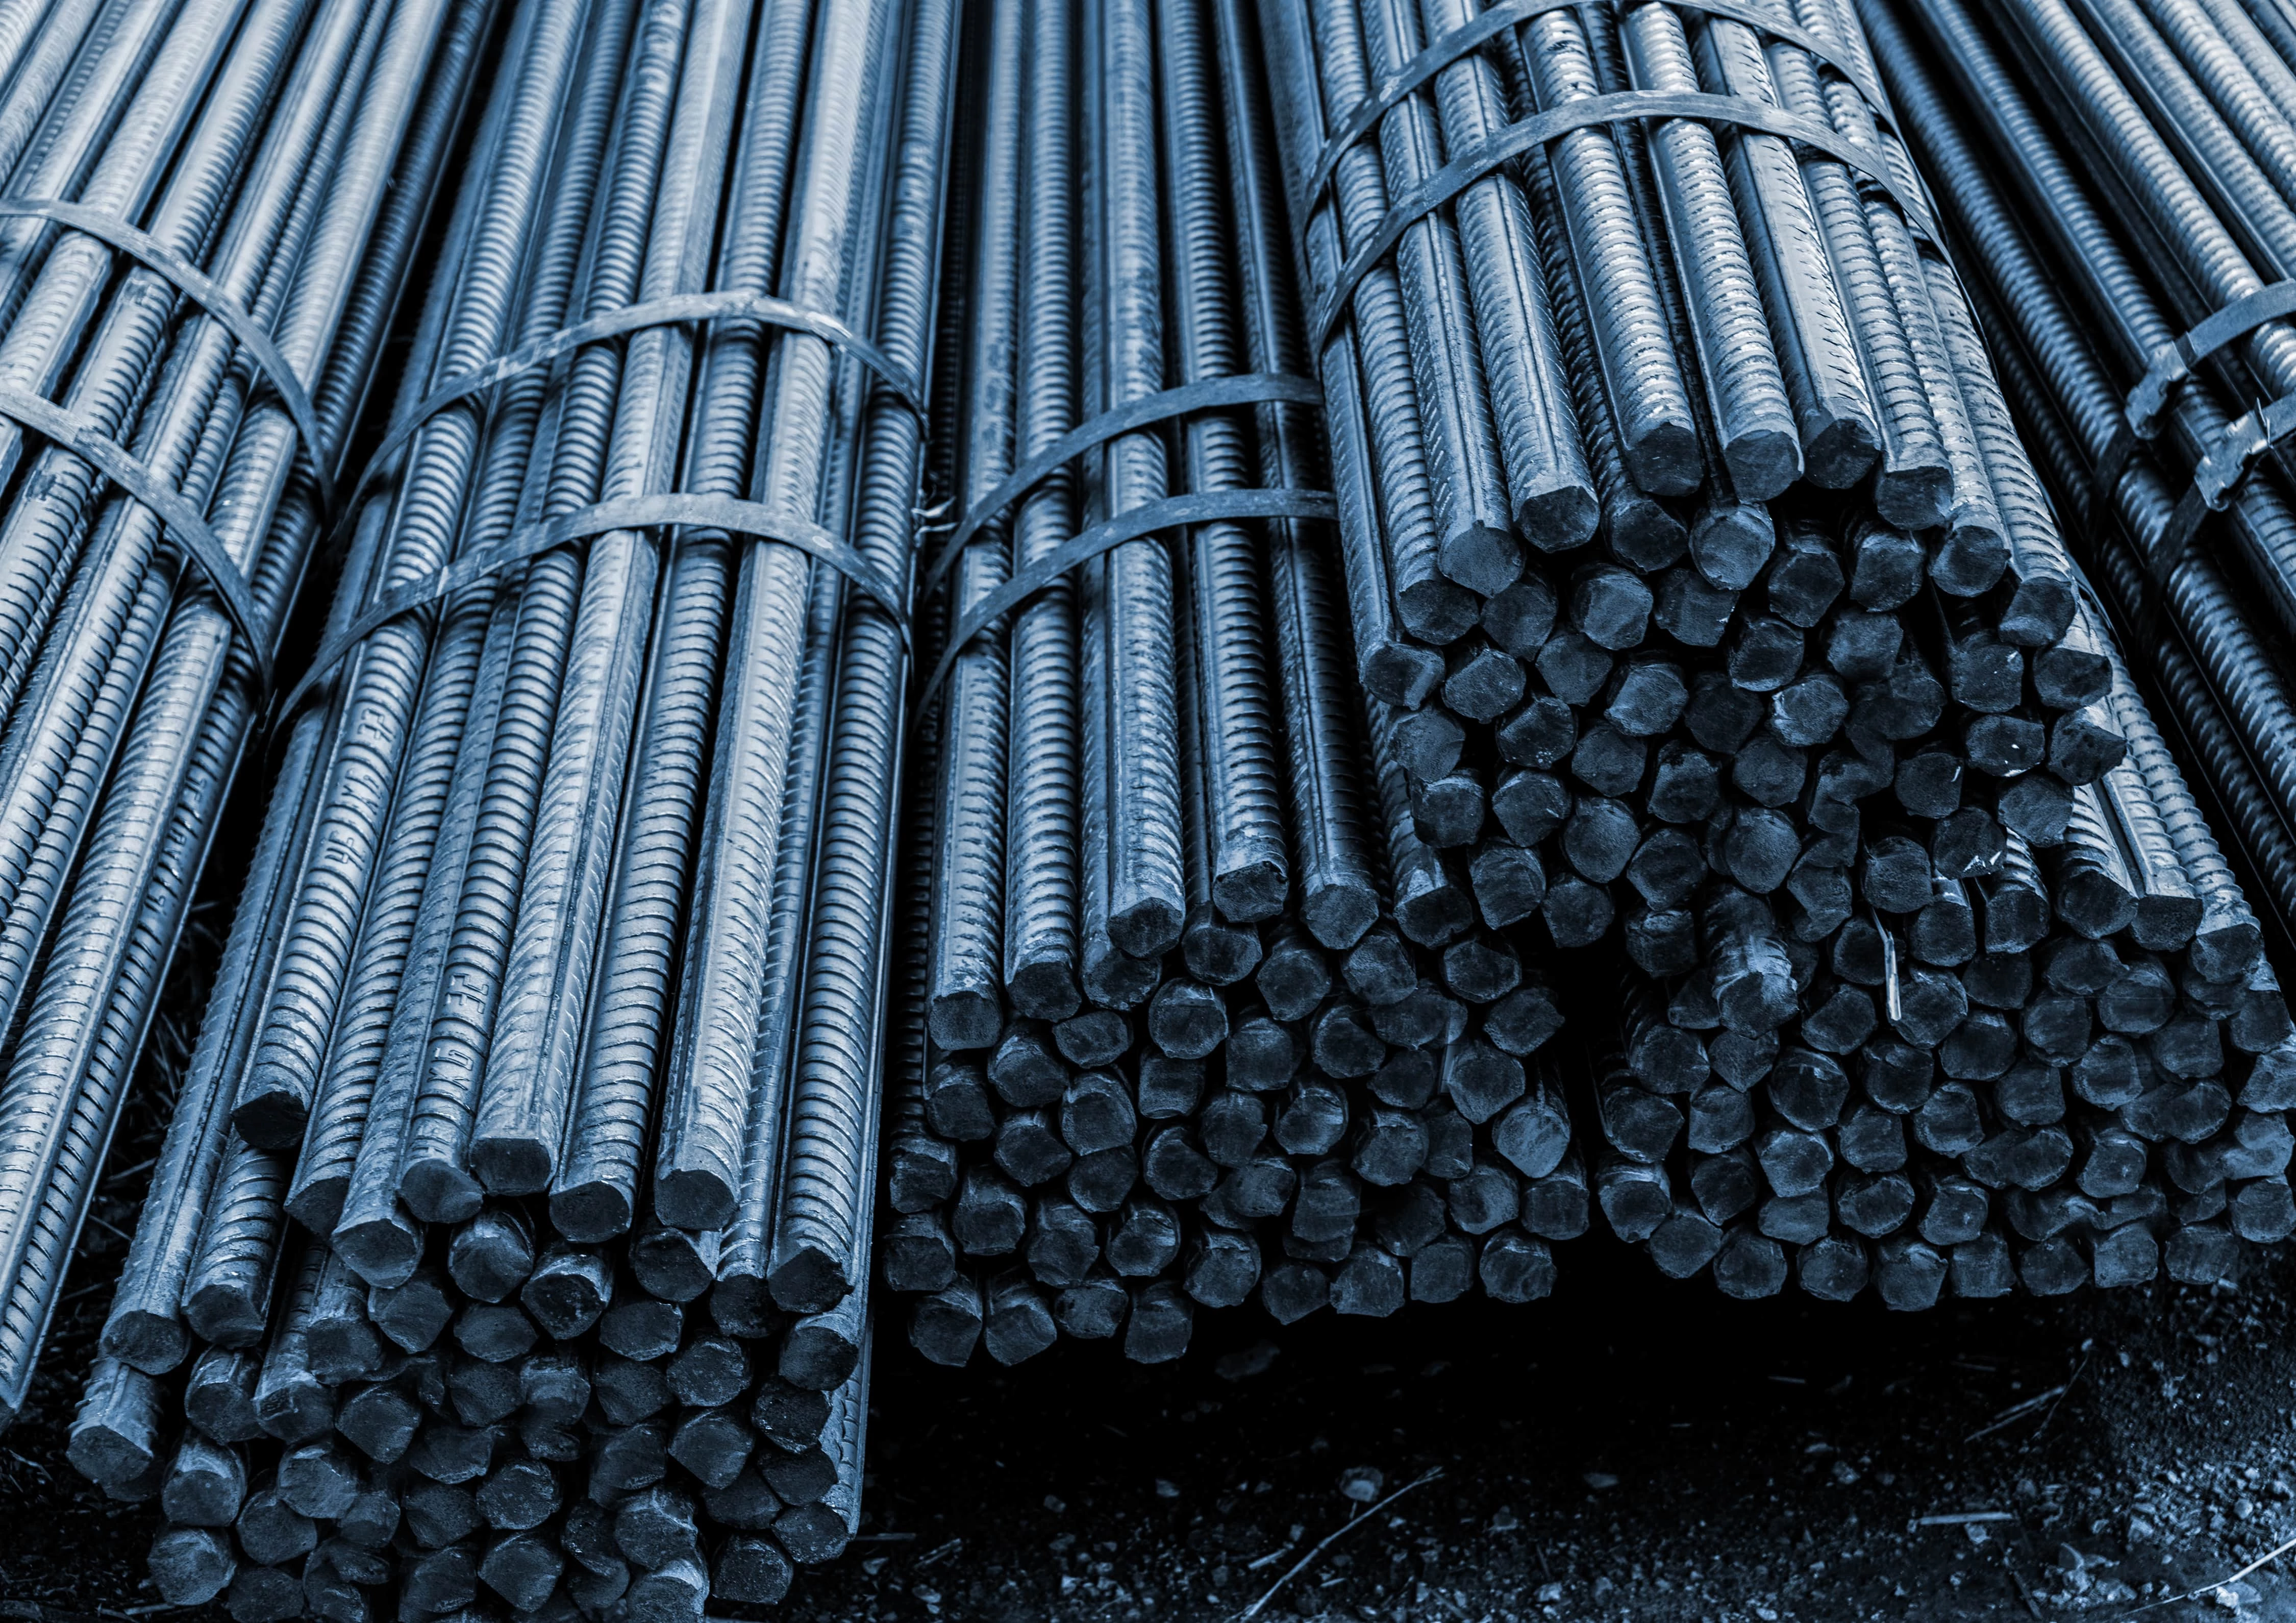 Product Category: Reinforcing steel bars